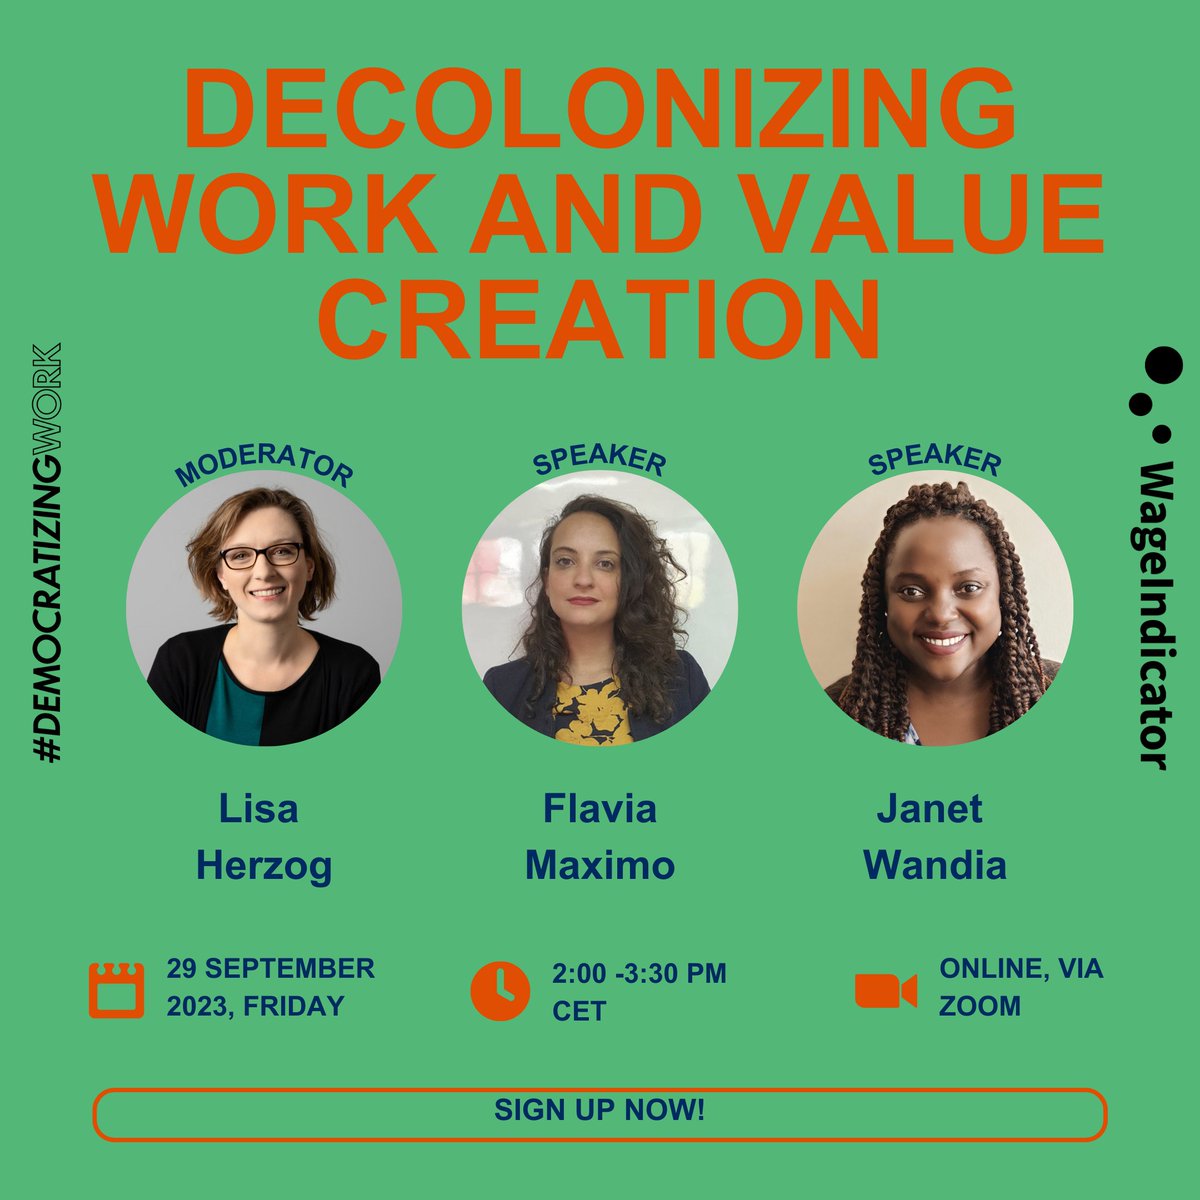 Only a few hours to go for our webinar hosted with #DemocratizingWork! Our expert panelists will discuss how we can decolonise #work and #value creation to create economies that do right be people and our planet.

If you haven't yet, sign up at wageindicator.org/about/events/2…